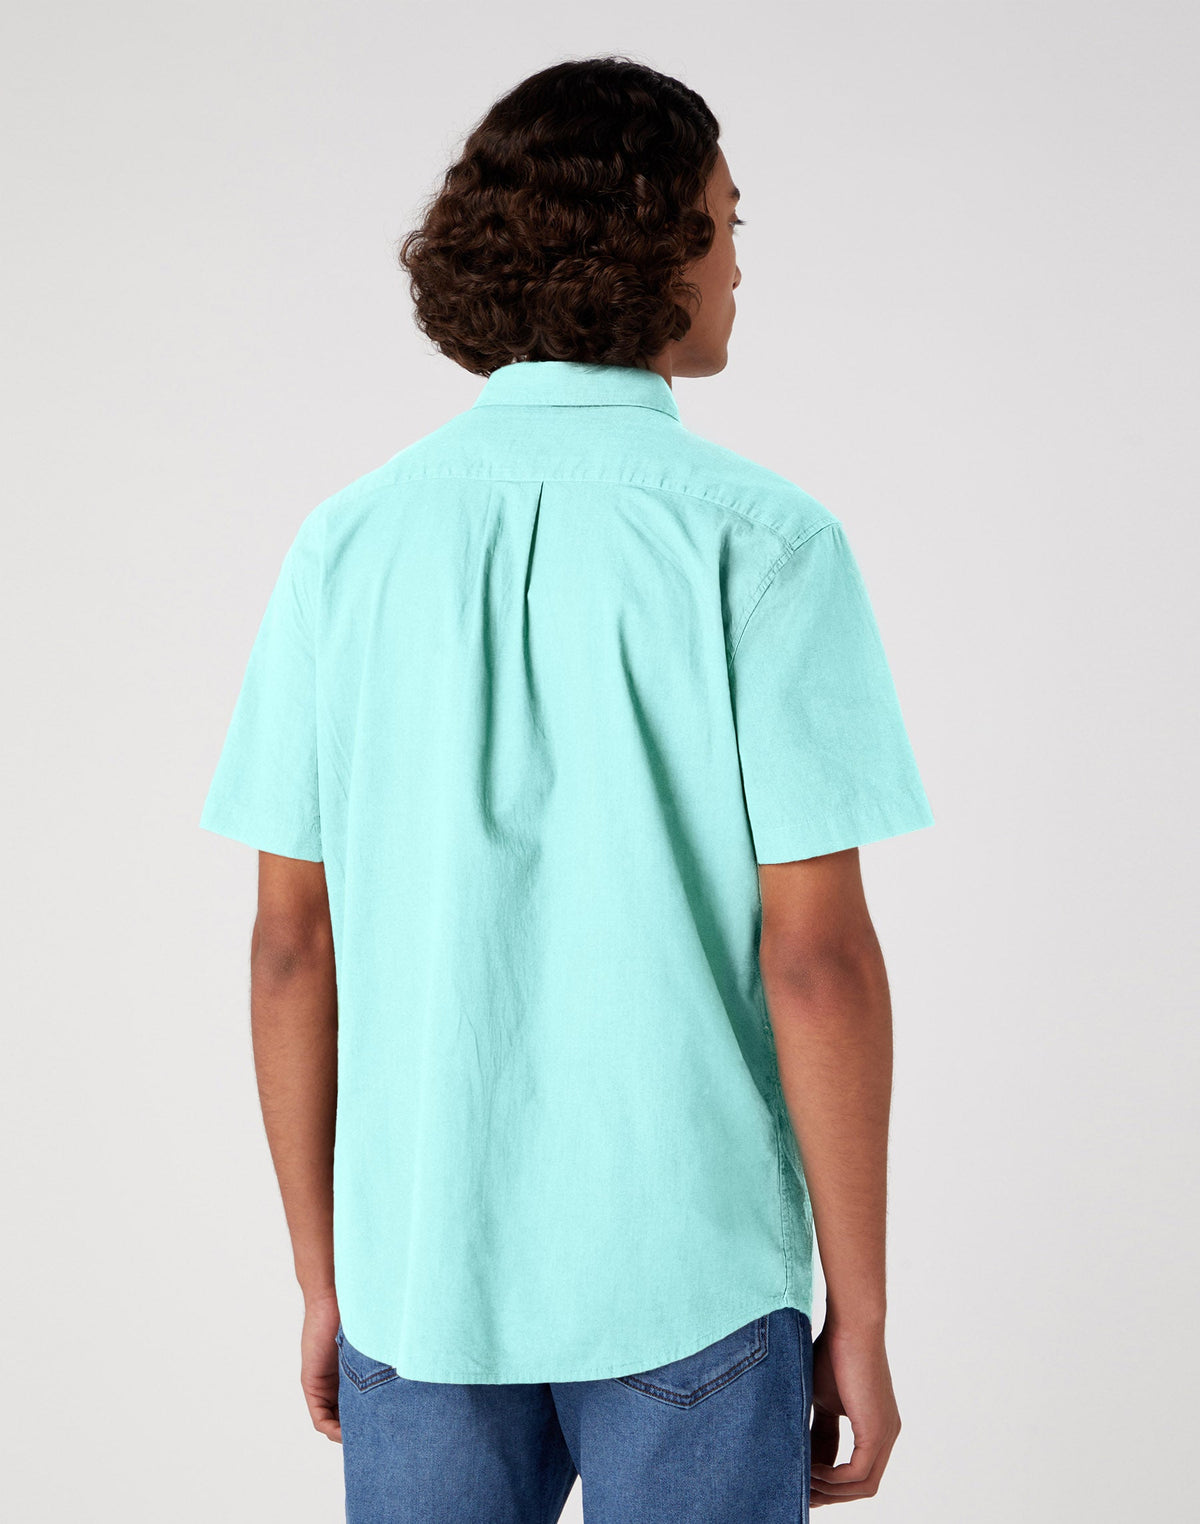 Short Sleeve One Pocket Shirt in Canal Blue